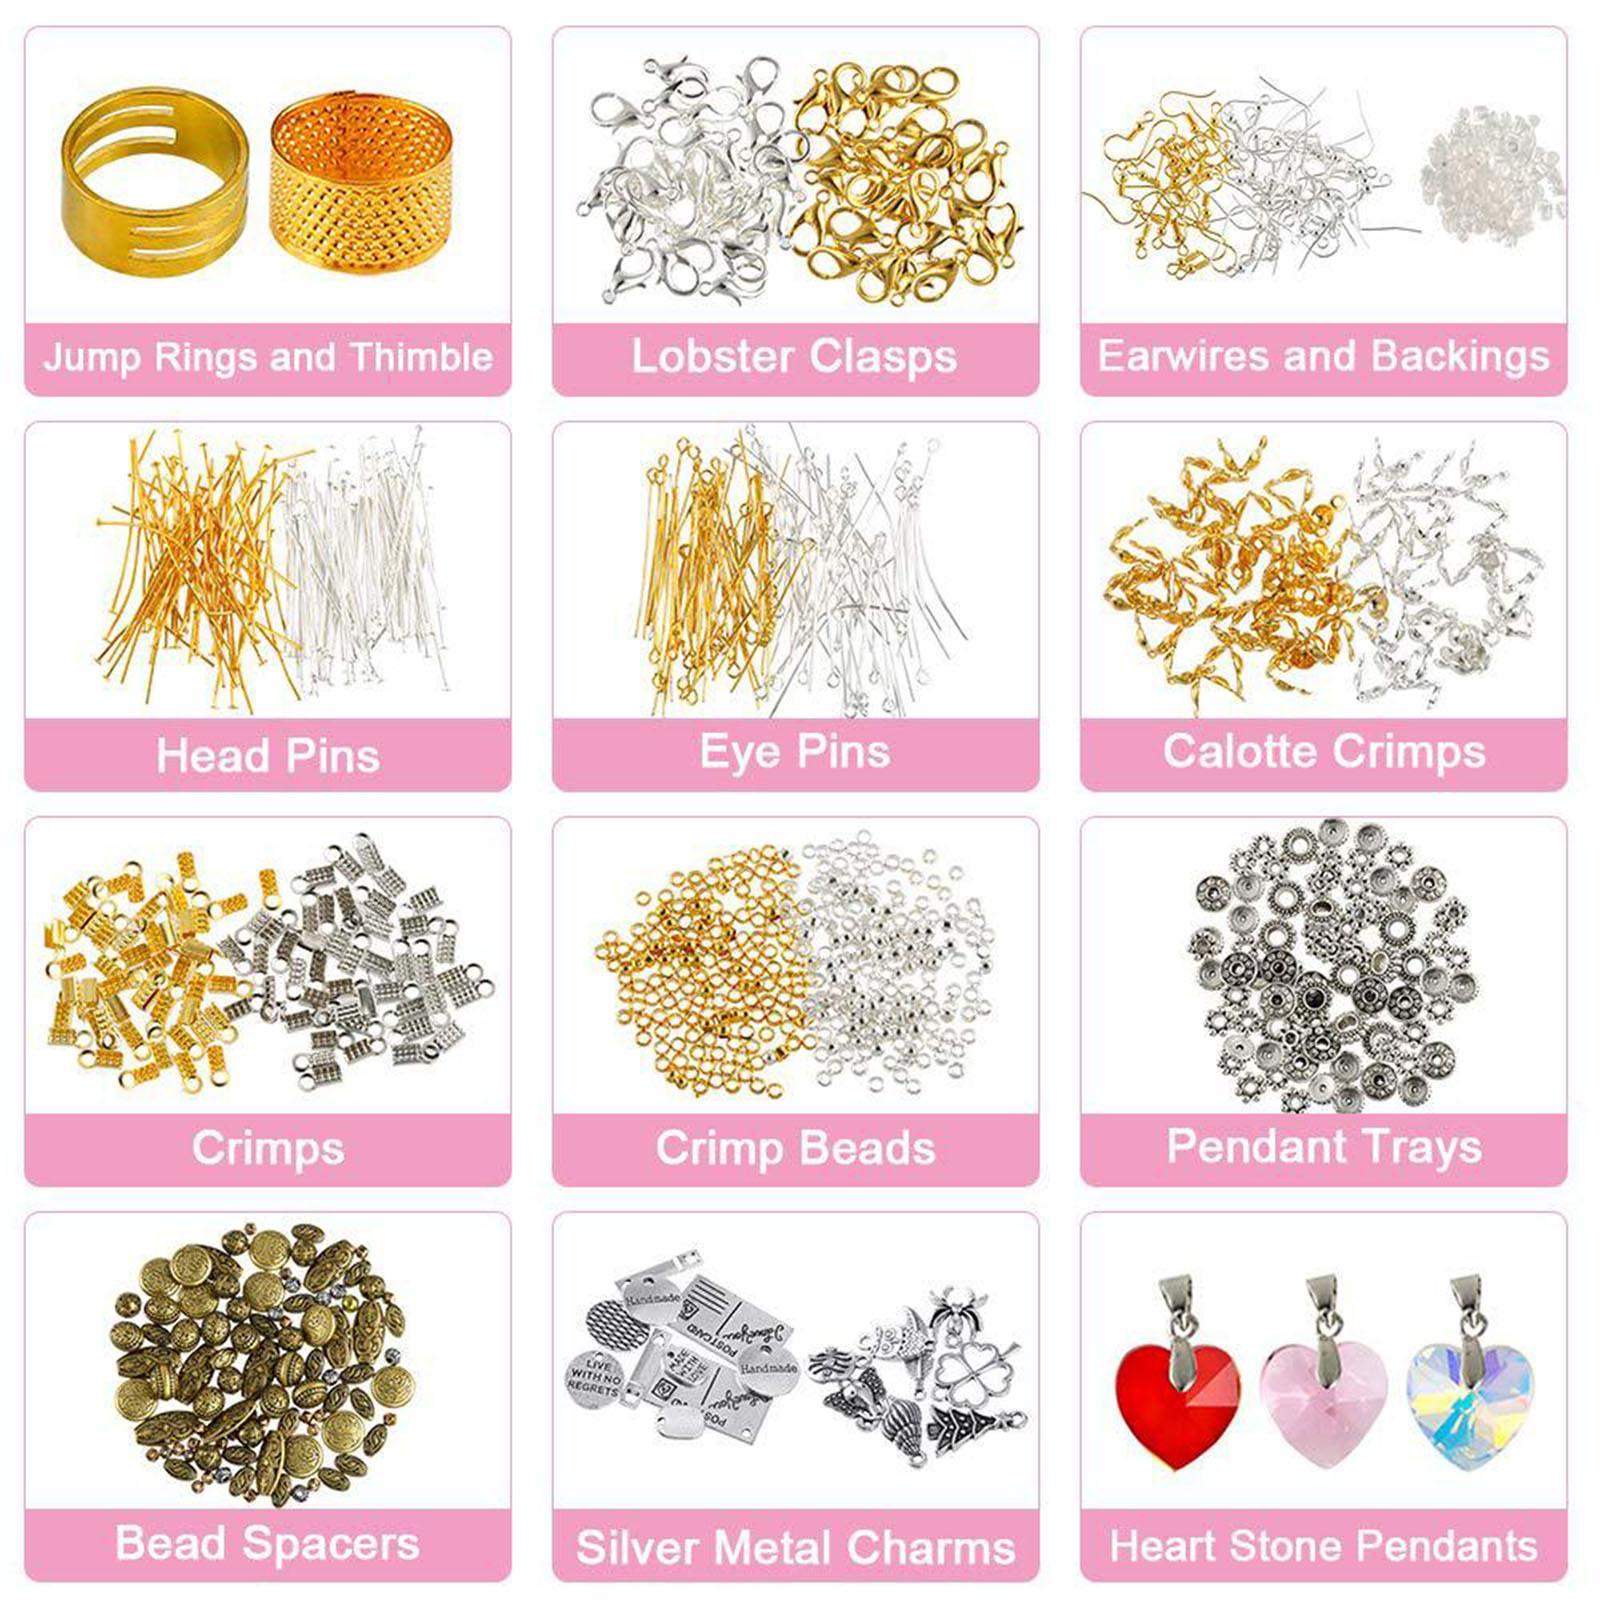 Seed Beads Bracelet Beads Assortments Crafts Set Bulk Wire Lobster Clasps Eye Pins Earwires for Necklaces Jewelry Making